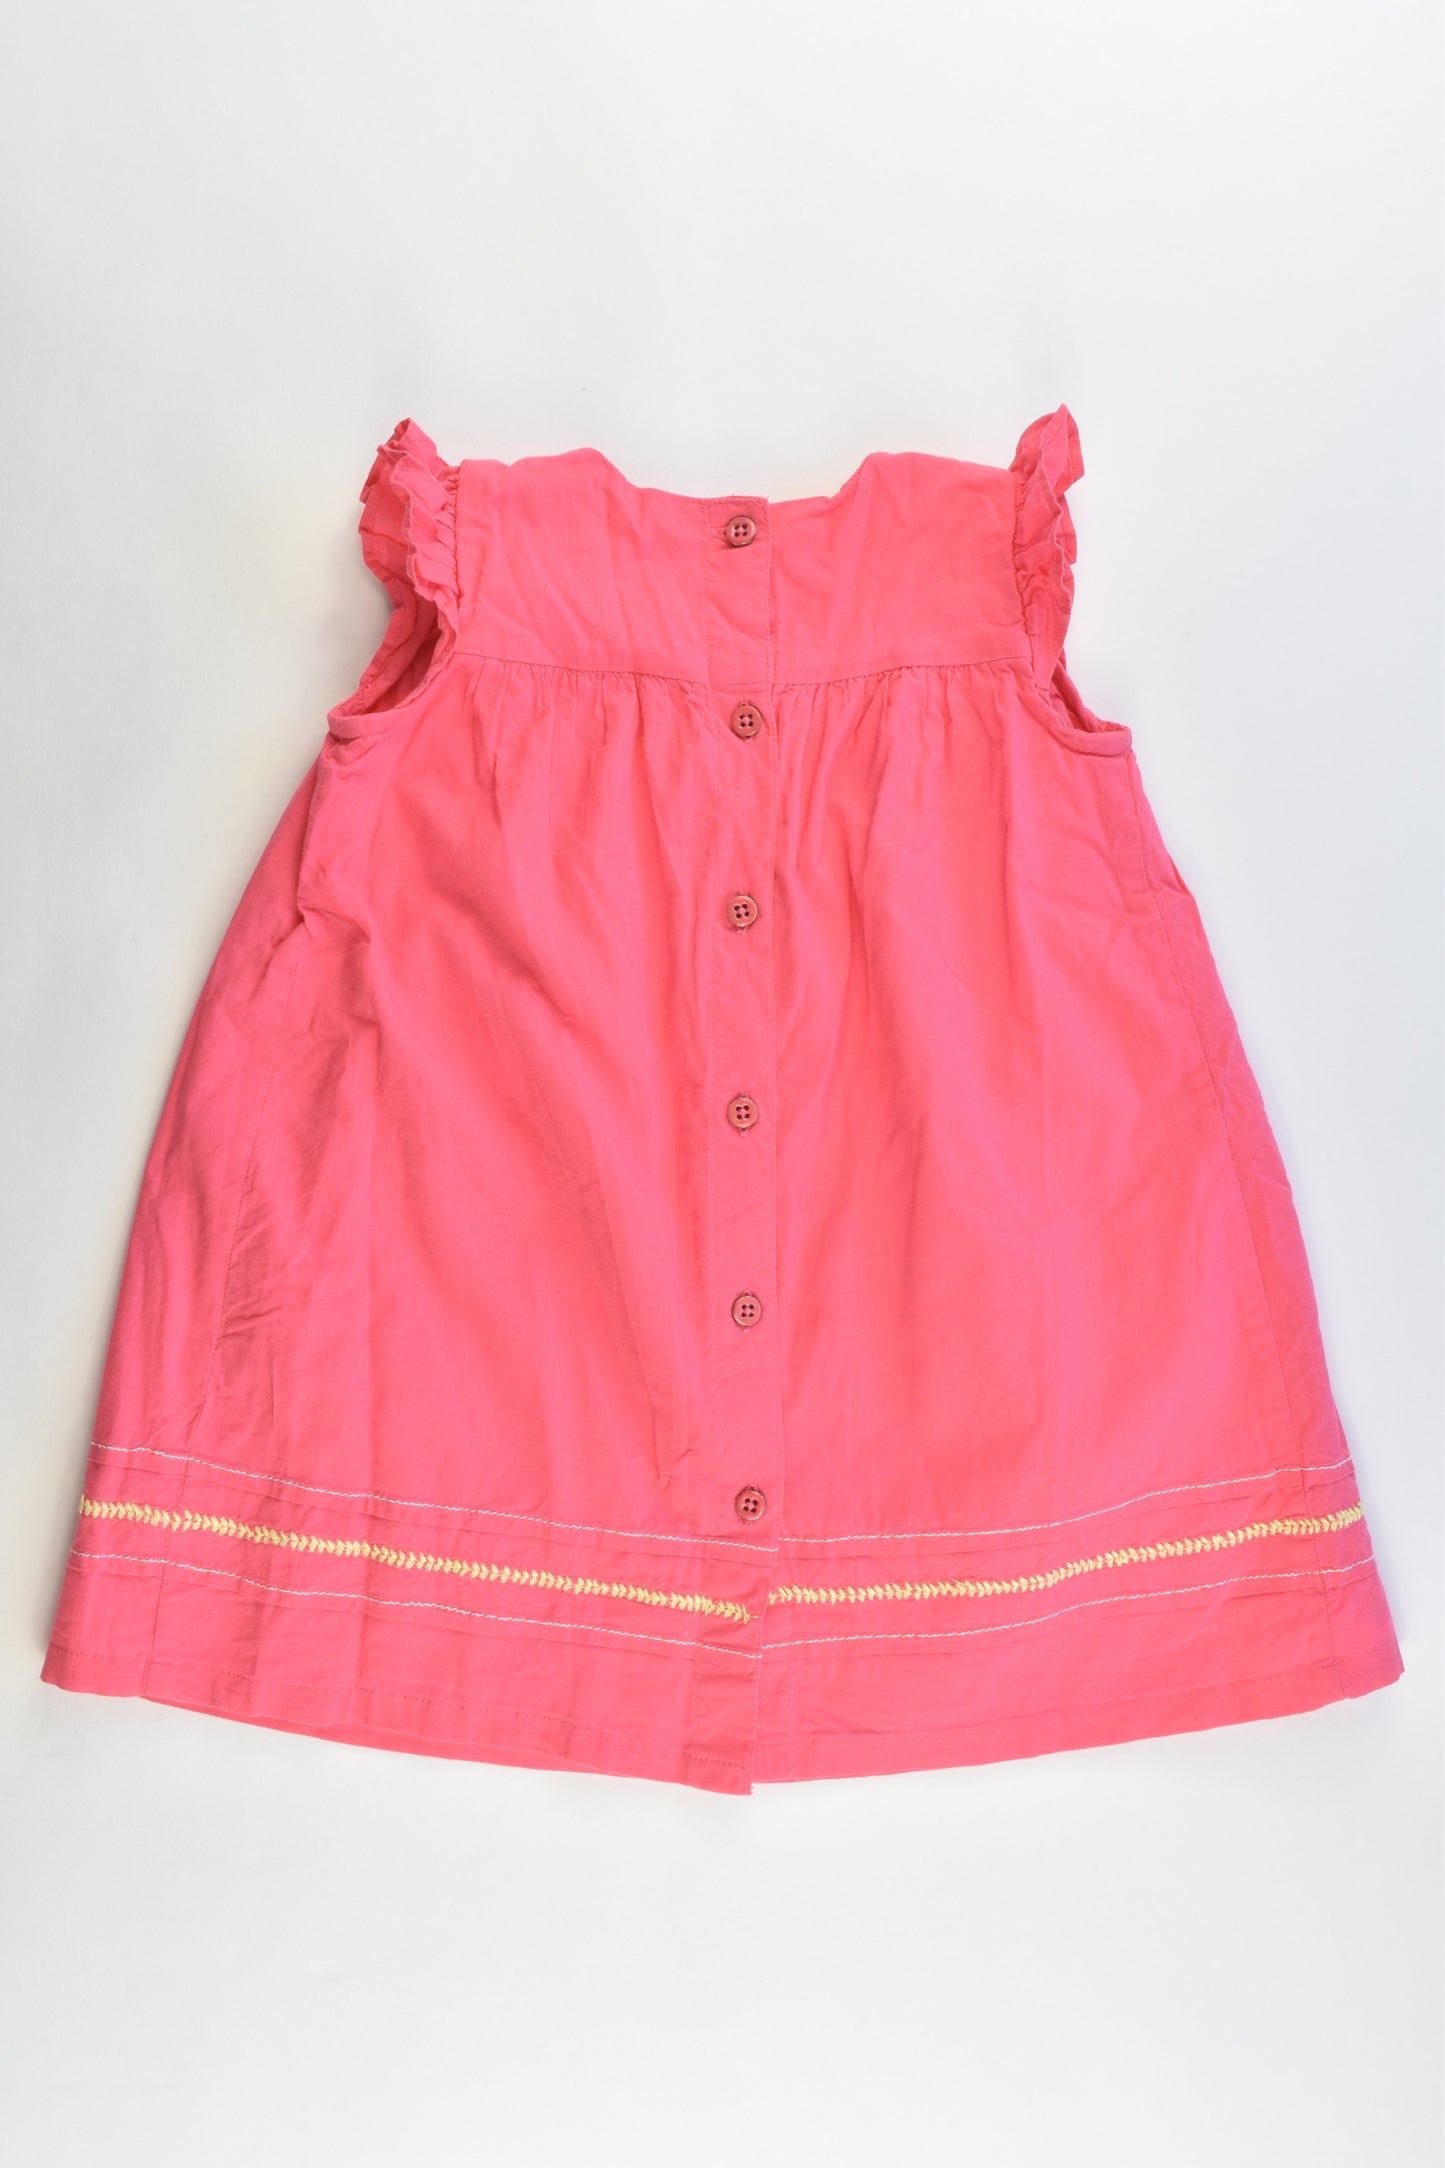 M&S Size 9-12 months Lined Dress and Matching Bloomers